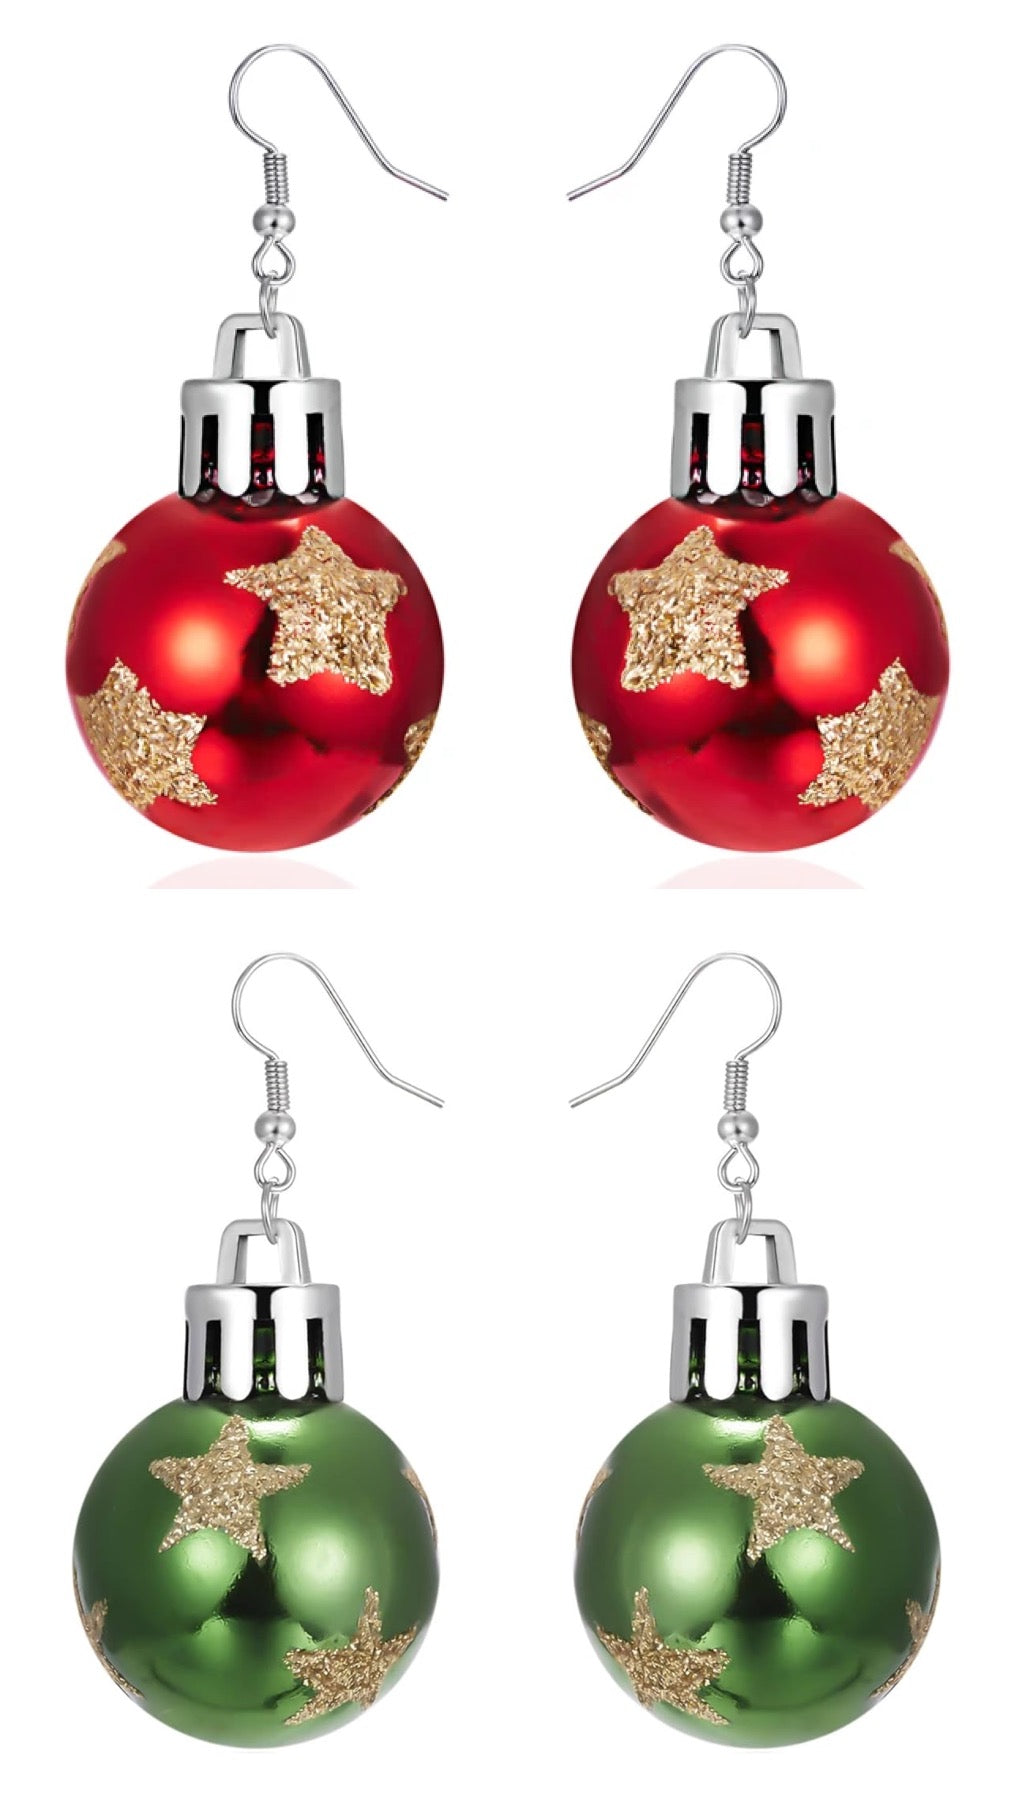 HOLIDAY ORNAMENT EARRINGS WITH GOLD STARS - Lil Monkey Boutique